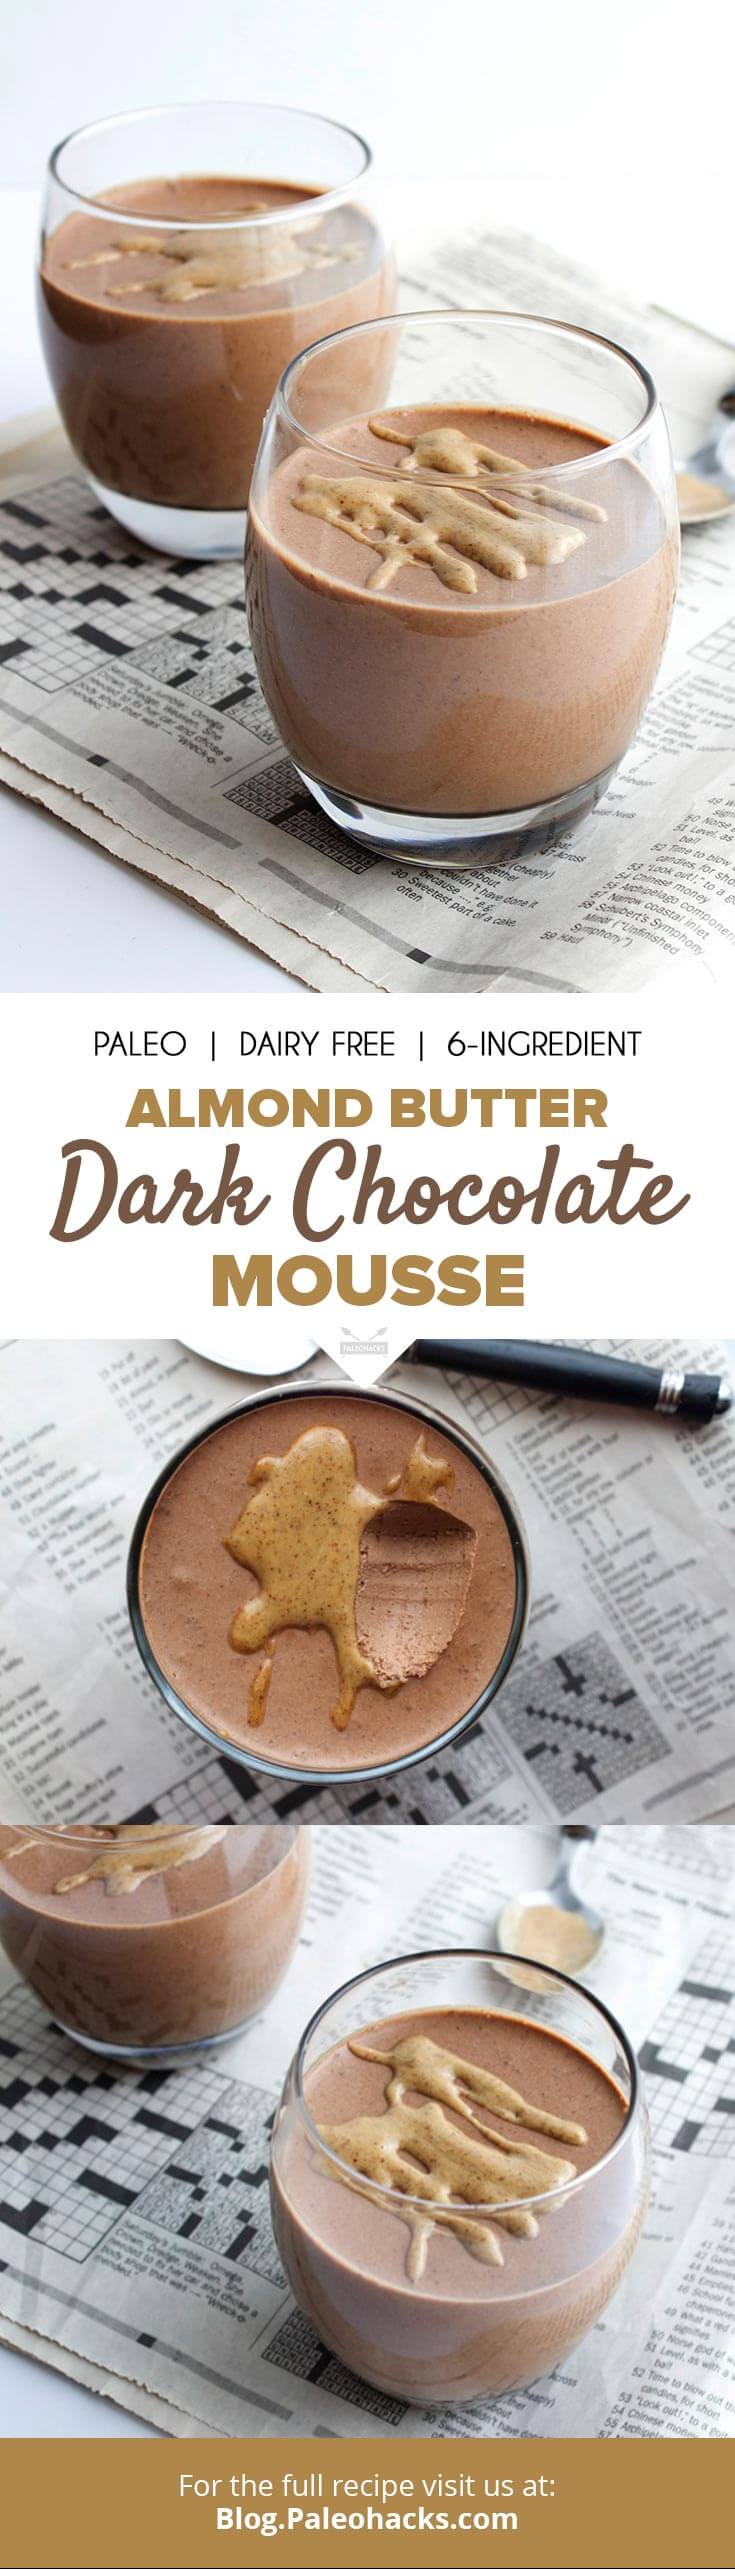 This dark chocolate mousse made with creamy almond butter is going to be your new favorite dessert.